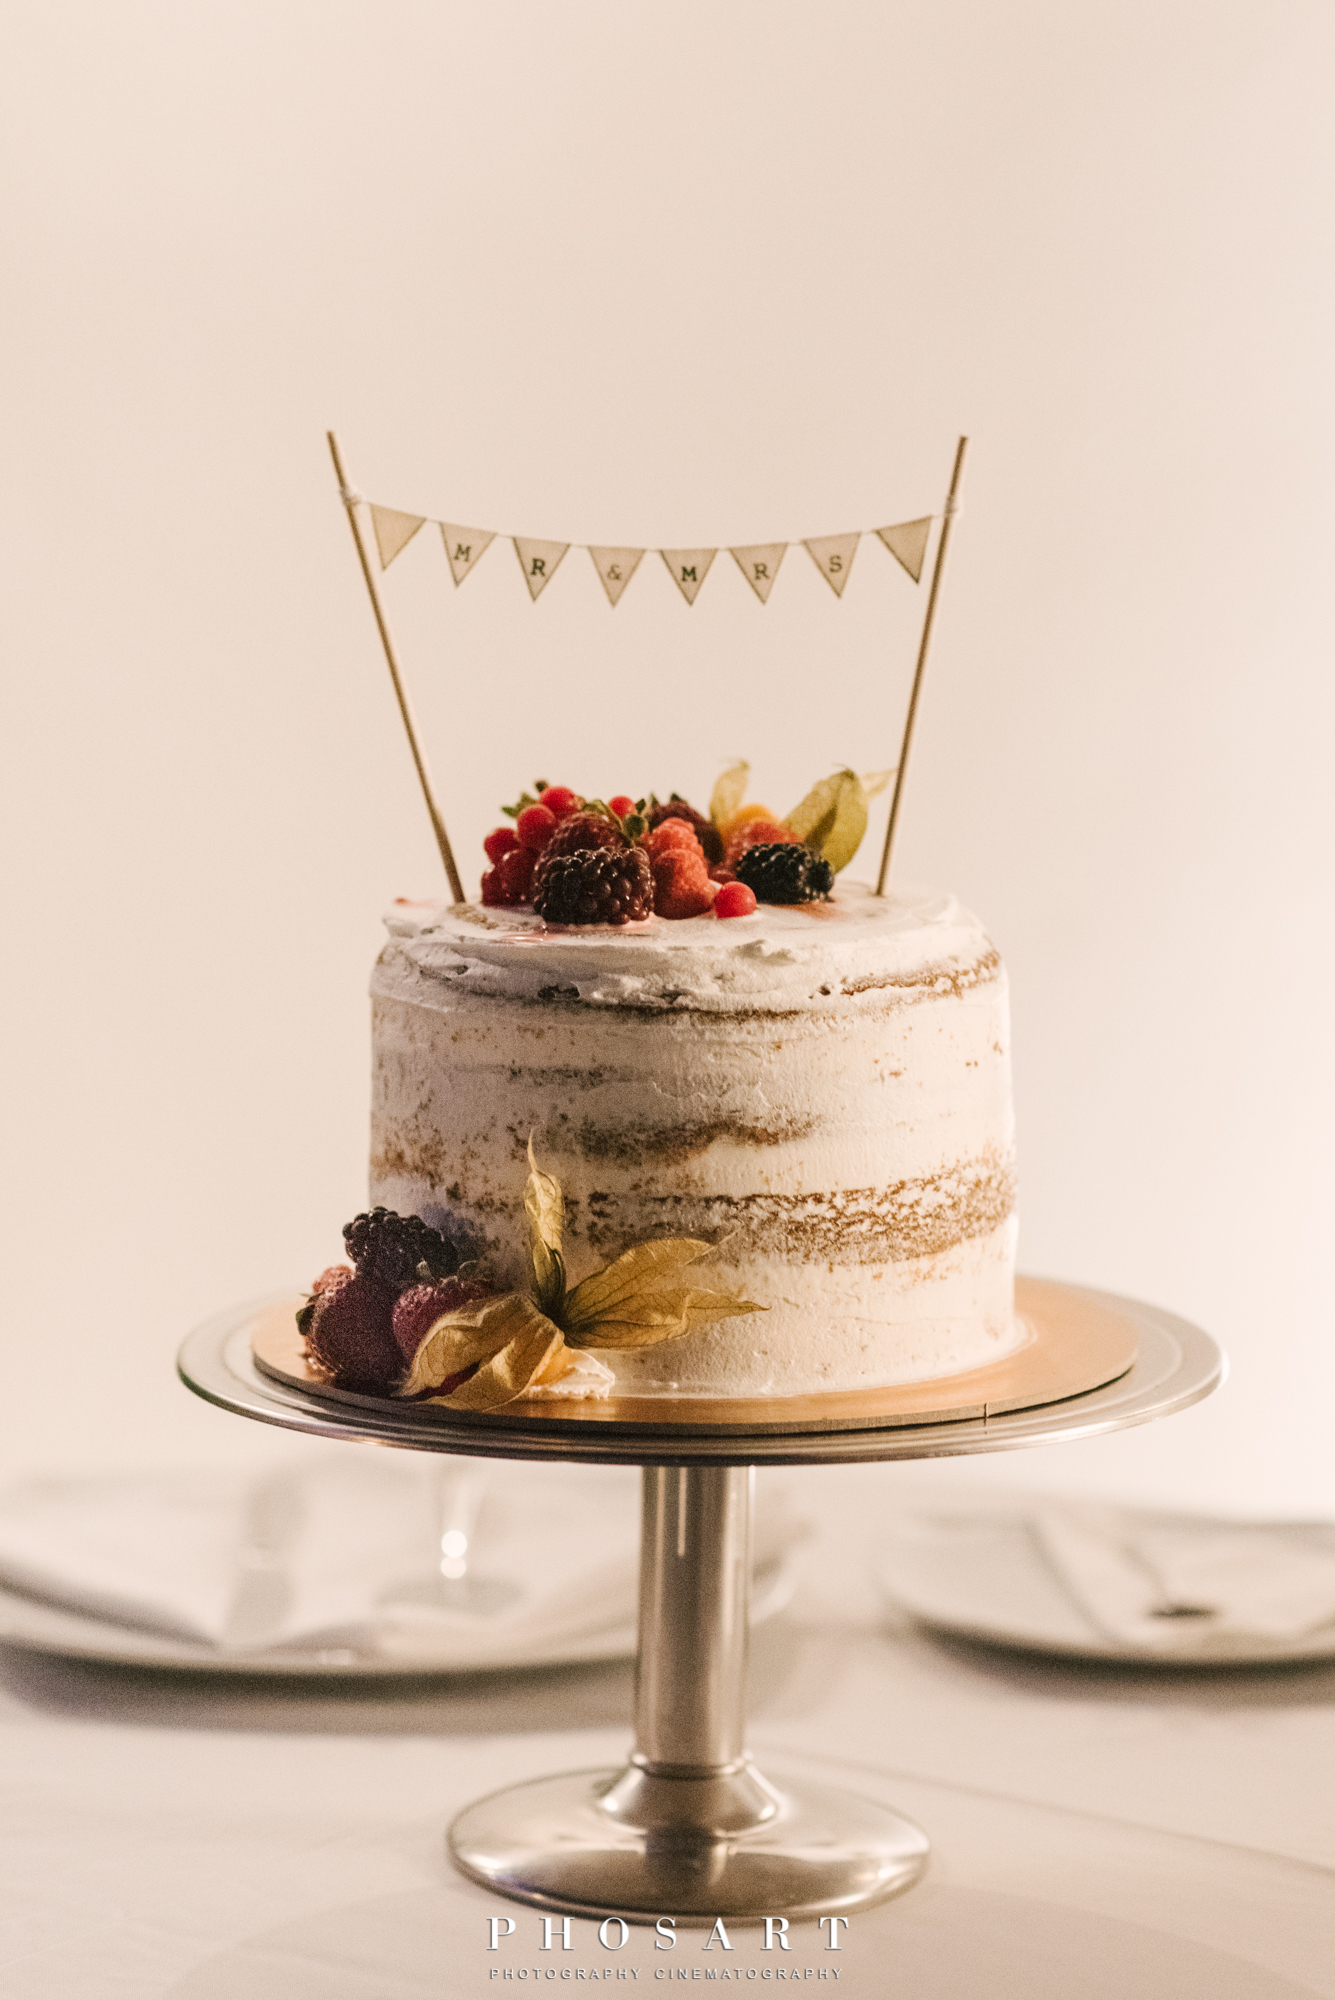 A multilayer wedding cake with cream, strawberries and raspberries